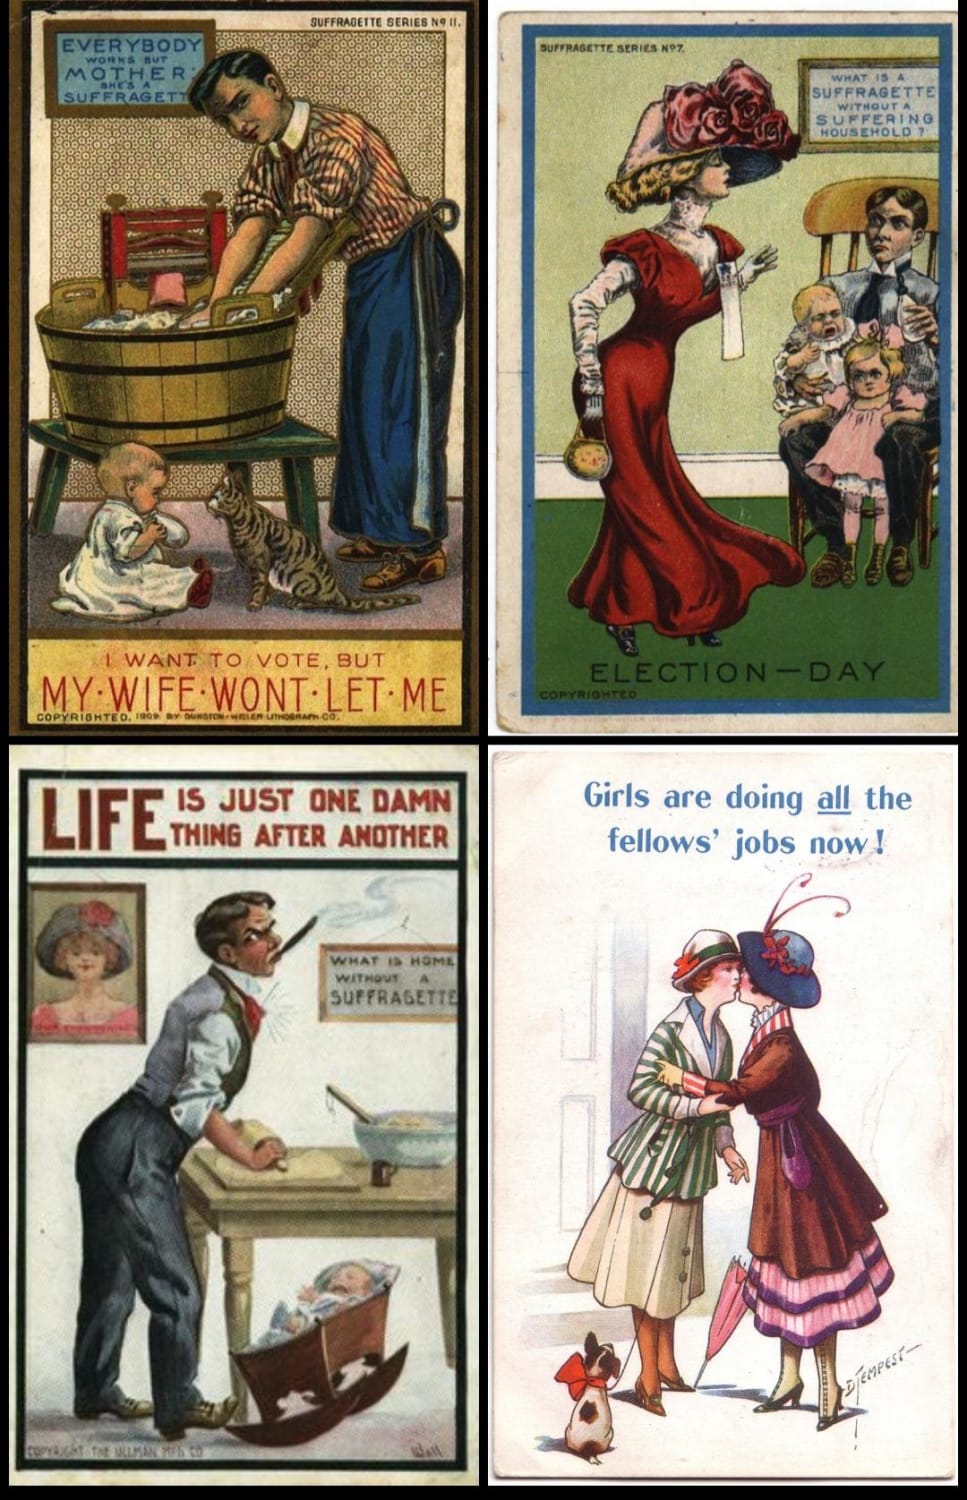 Anti-Suffrage ads from 1909